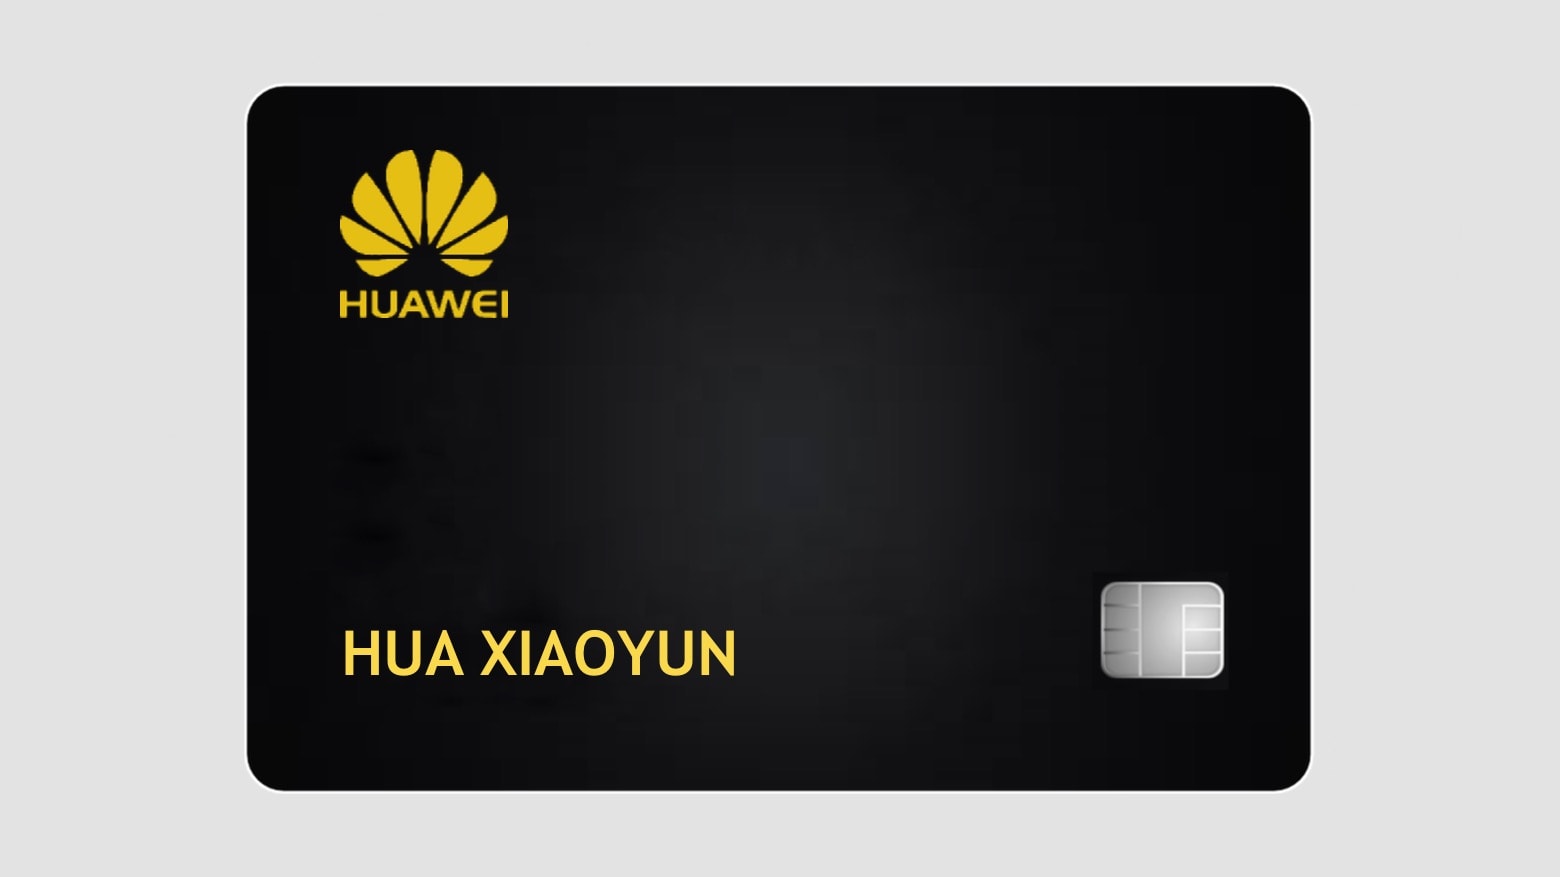 Huawei introduced its own credit card